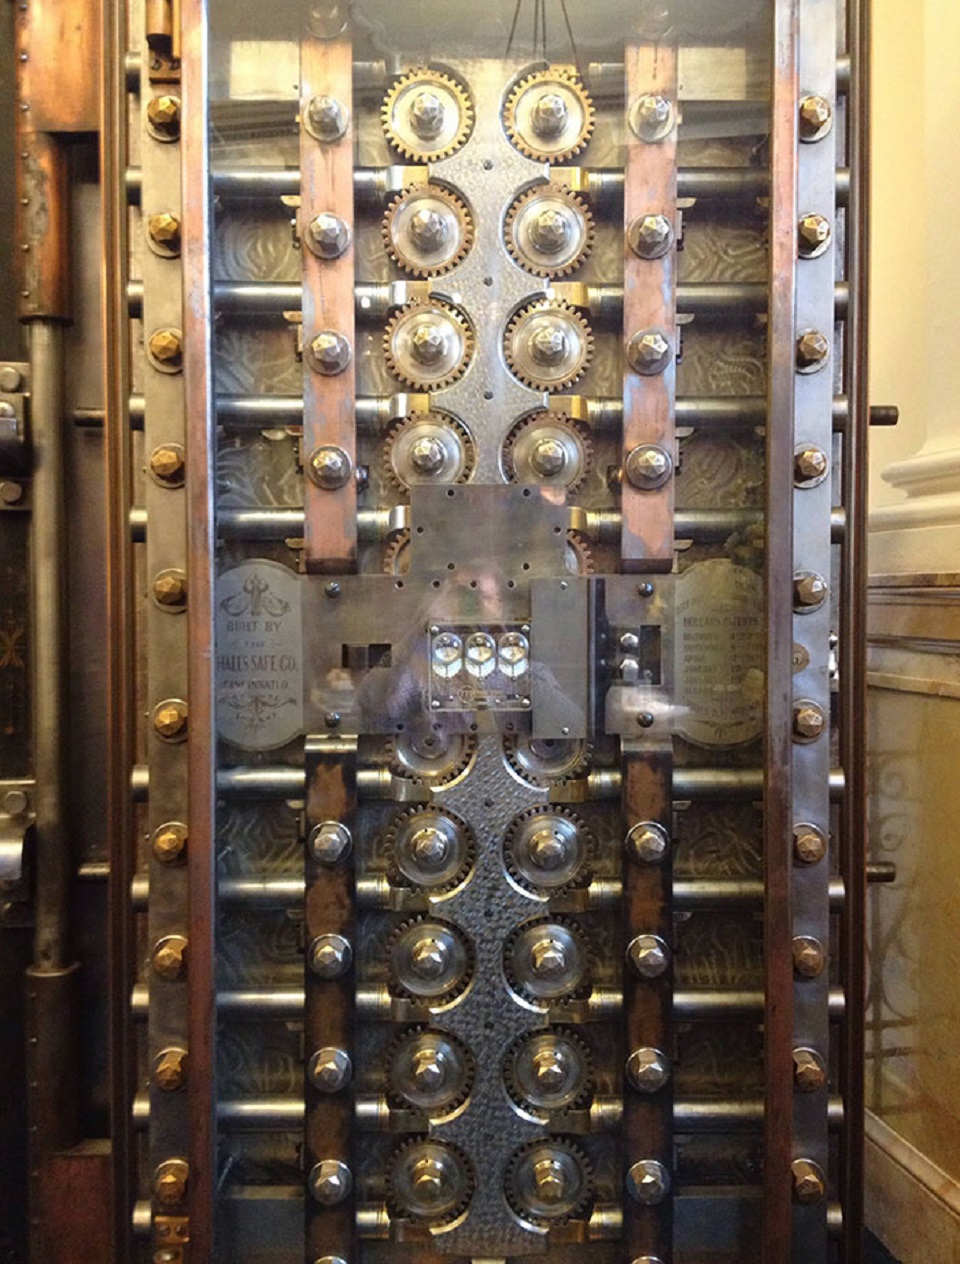 Inside The Vault Door At The Bank I Work At. Beautiful Engineering From 1800s